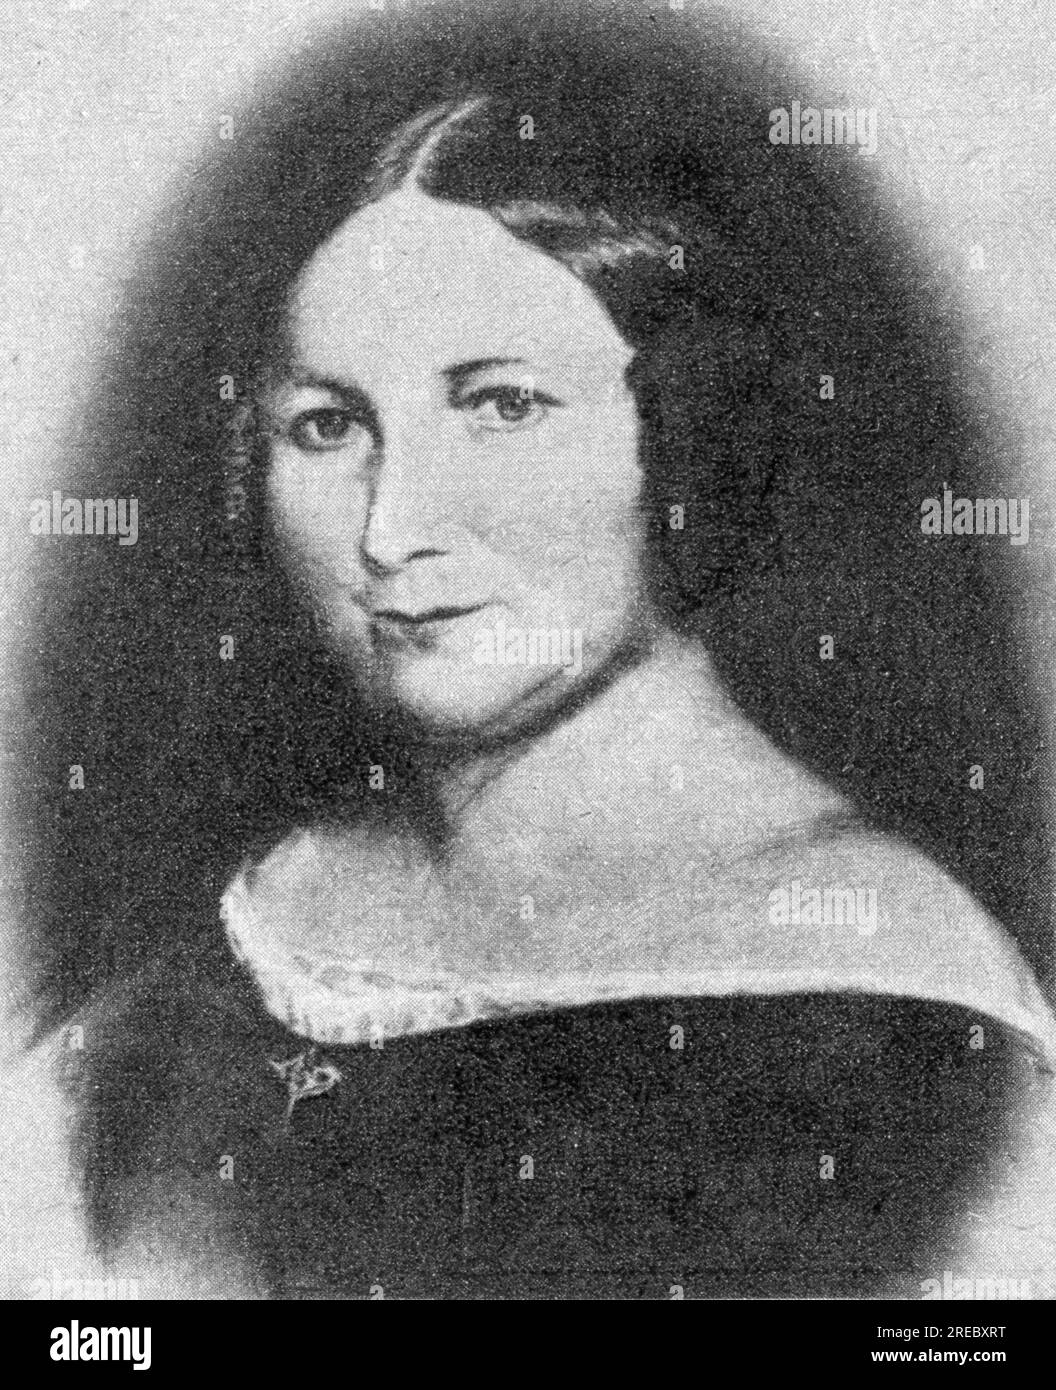 Brandt, Caroline, 1793 - 23.2,1852, attrice e cantante tedesca, ADDITIONAL-RIGHTS-CLEARANCE-INFO-NOT-AVAILABLE Foto Stock